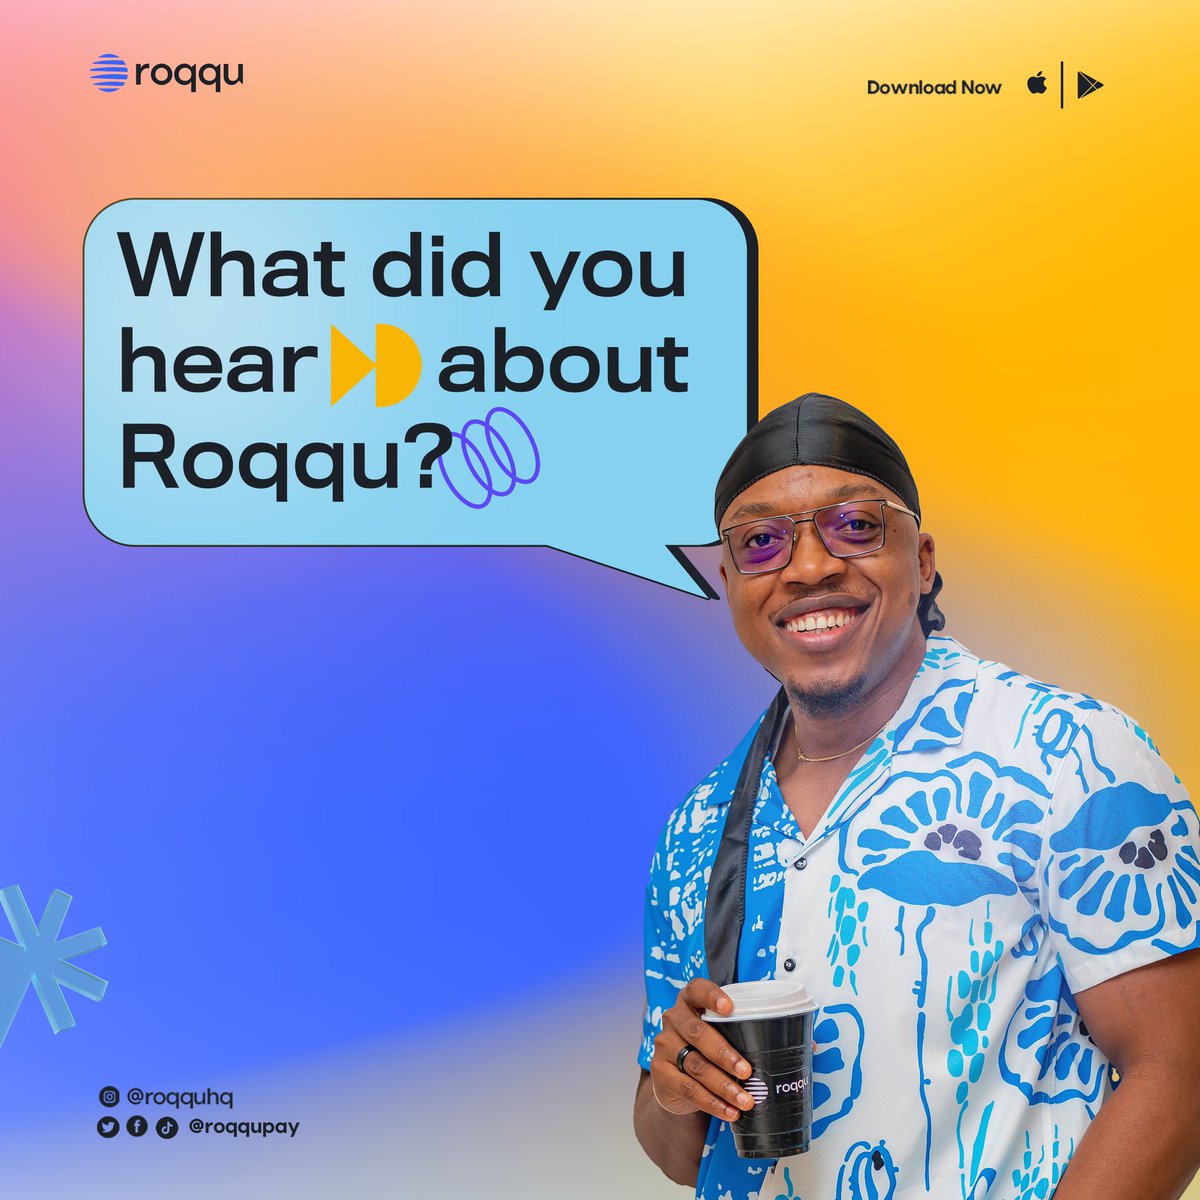 @aproko_doctor praised us as the best crypto exchange for seamless and easy trading, whether you're an expert or a newbie. What did you hear 👂 about Roqqu? Share the positive reviews you've heard about Roqqu with us! #reviews